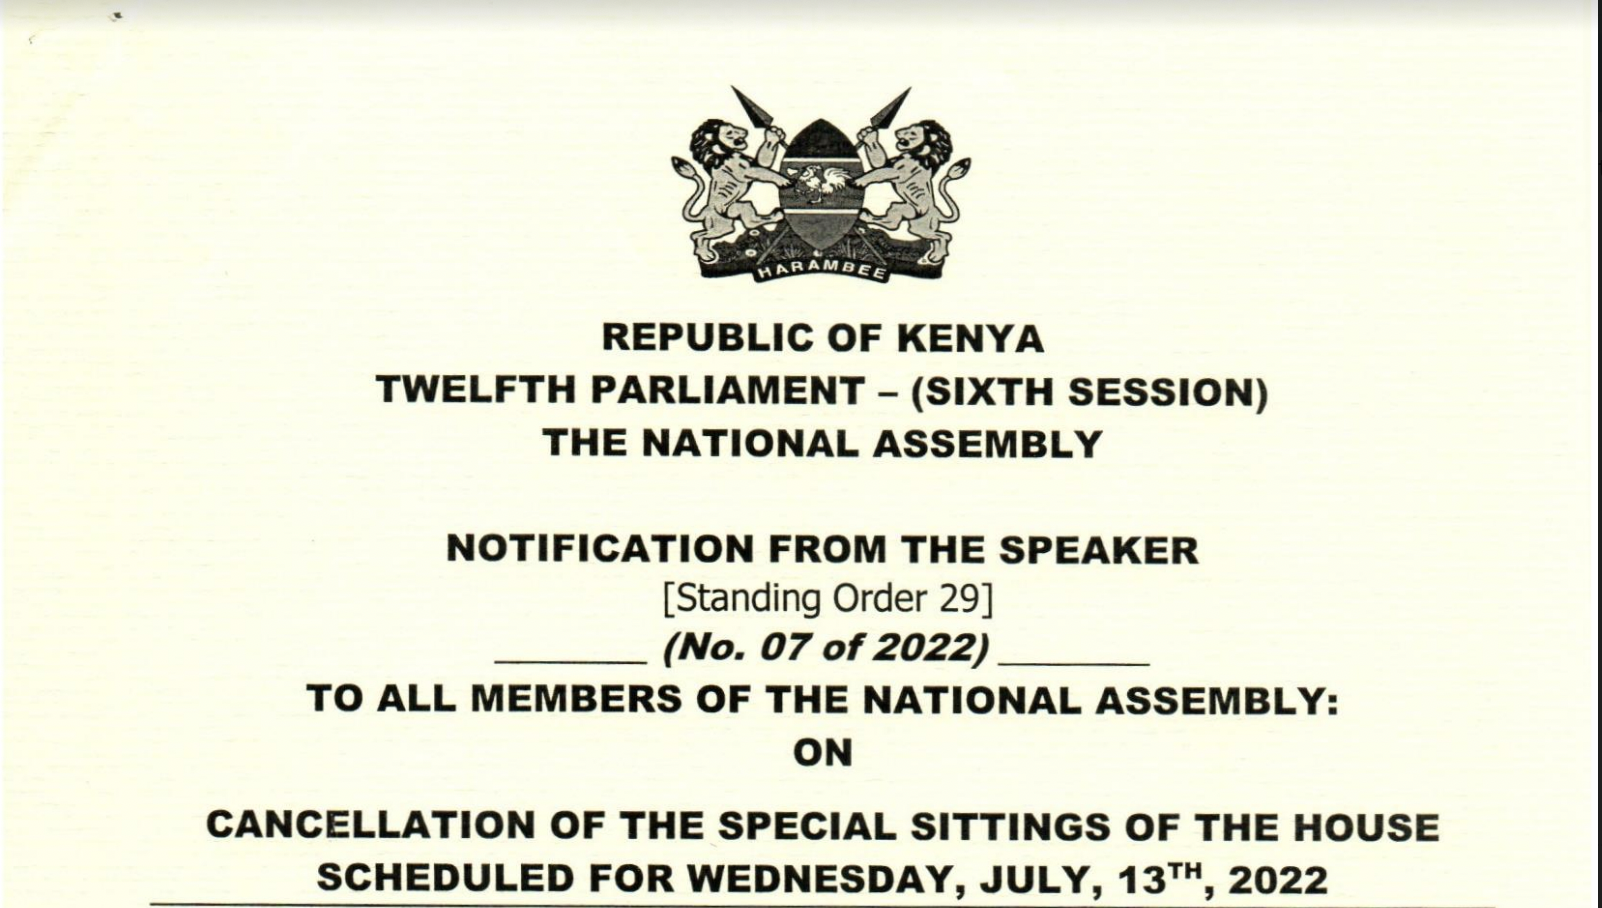 CANCELLATION OF THE SPECIAL SITTINGS OF THE HOUSE SCHEDULED FOR WEDNESDAY, JULY, 13TH, 2022